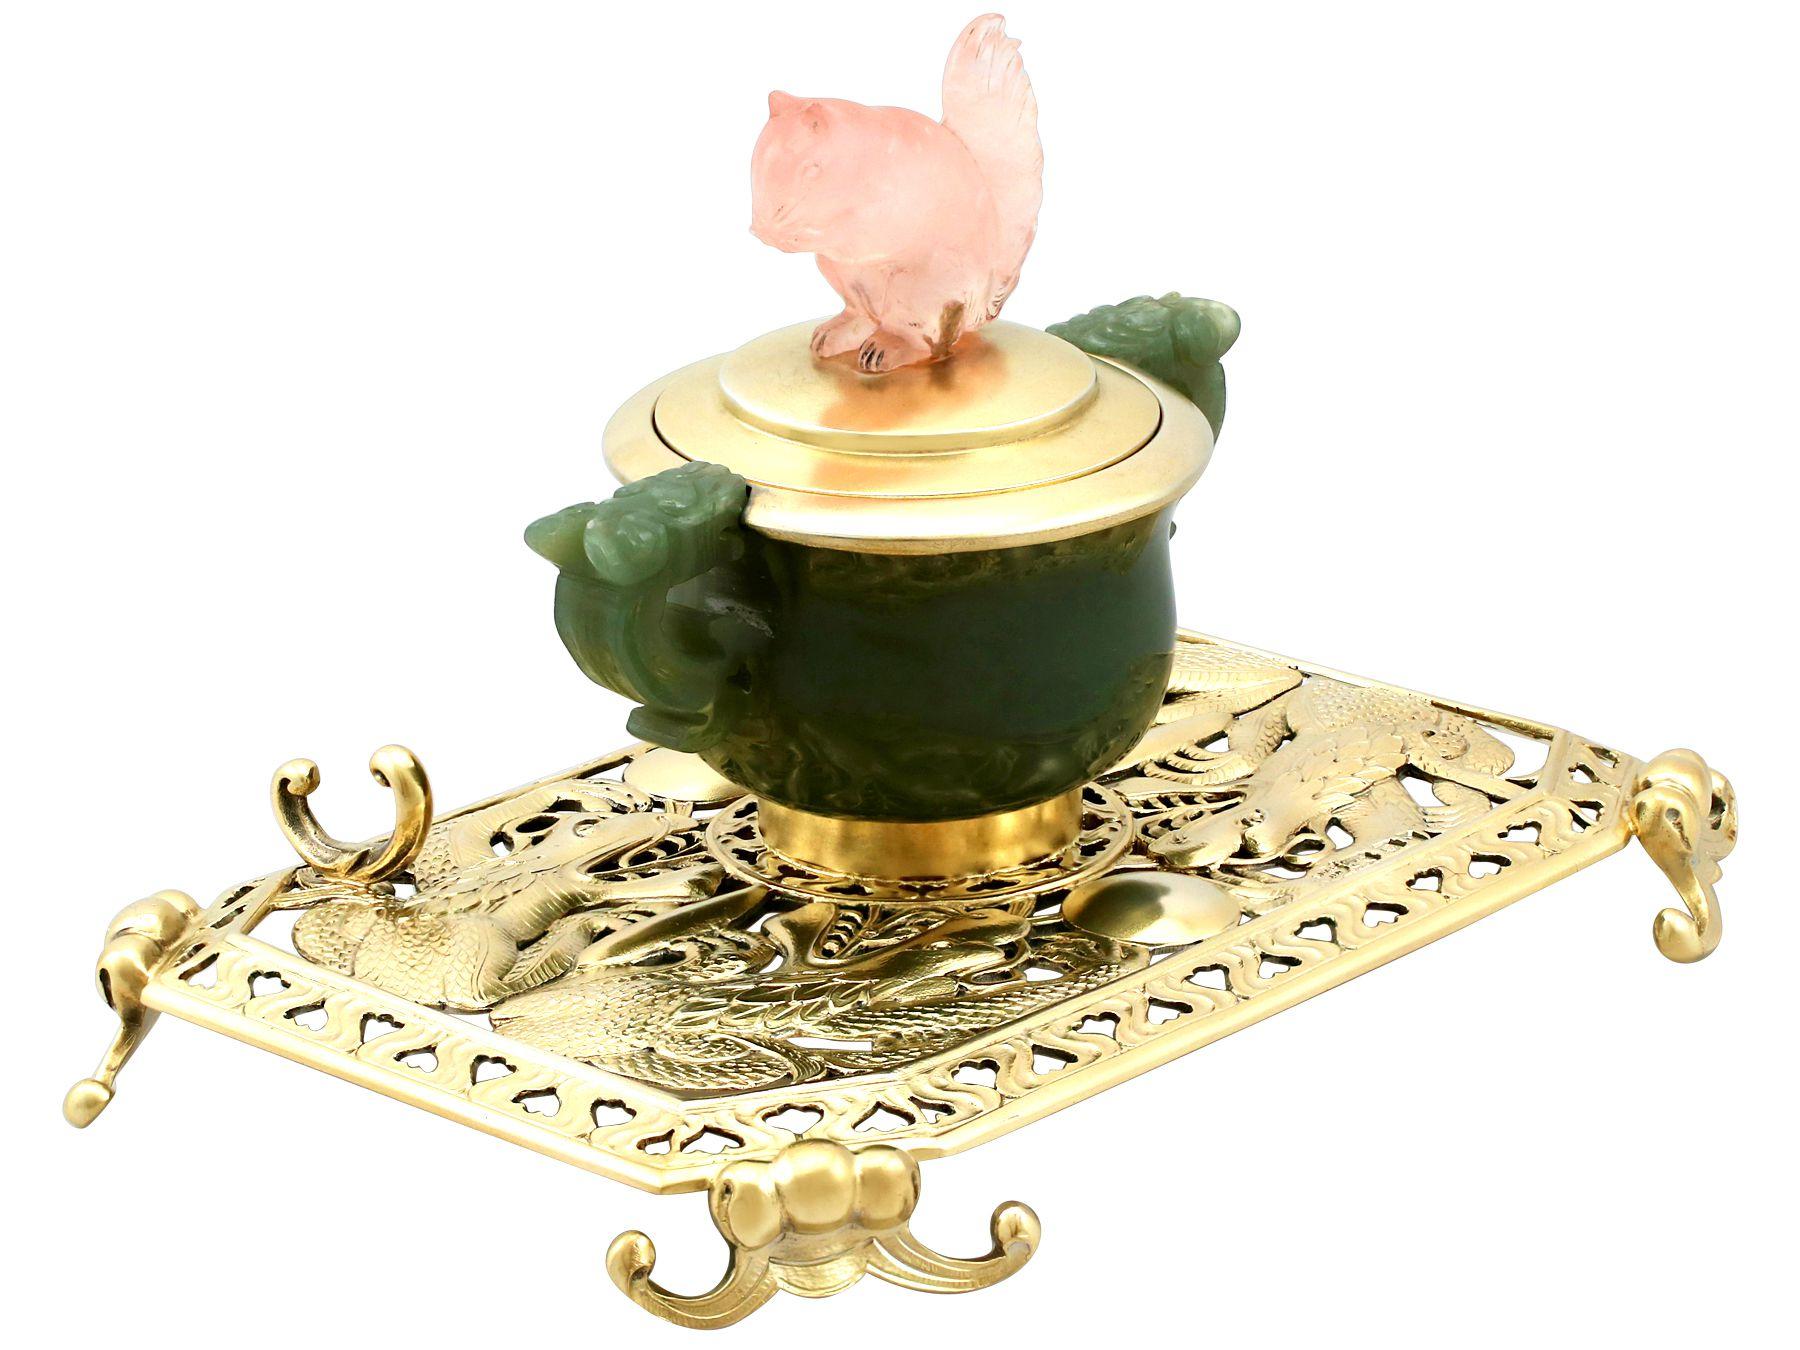 Antique 1926 Sterling Silver Nephrite and Rose Quartz Inkstand In Excellent Condition For Sale In Jesmond, Newcastle Upon Tyne